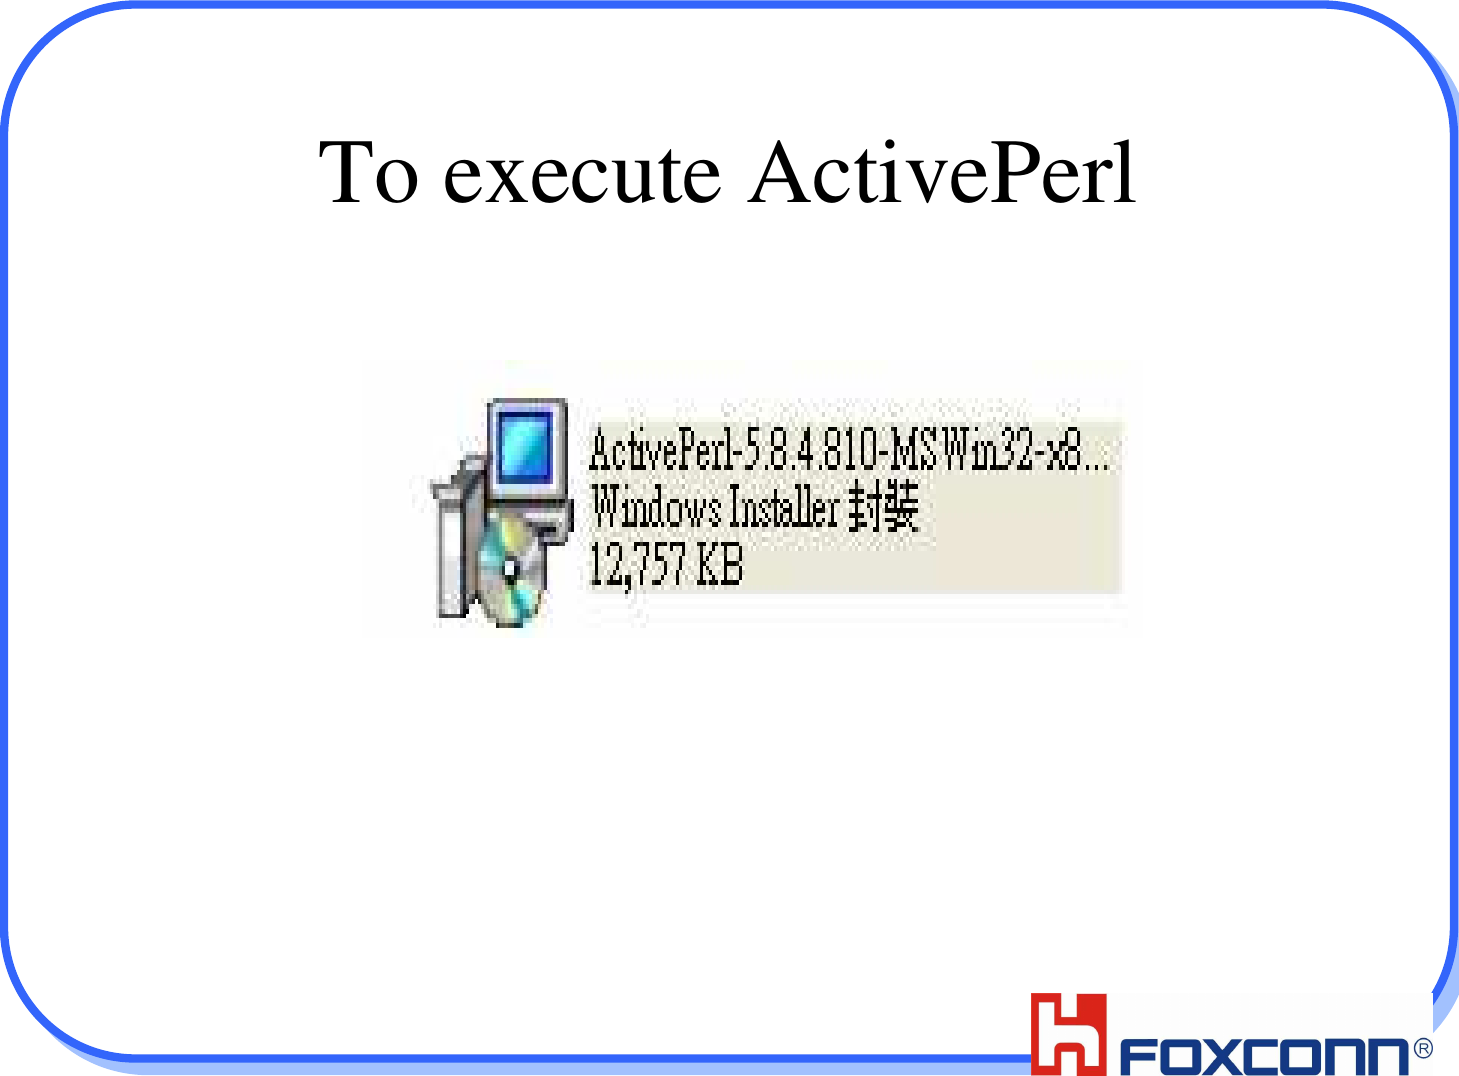 6To execute ActivePerl